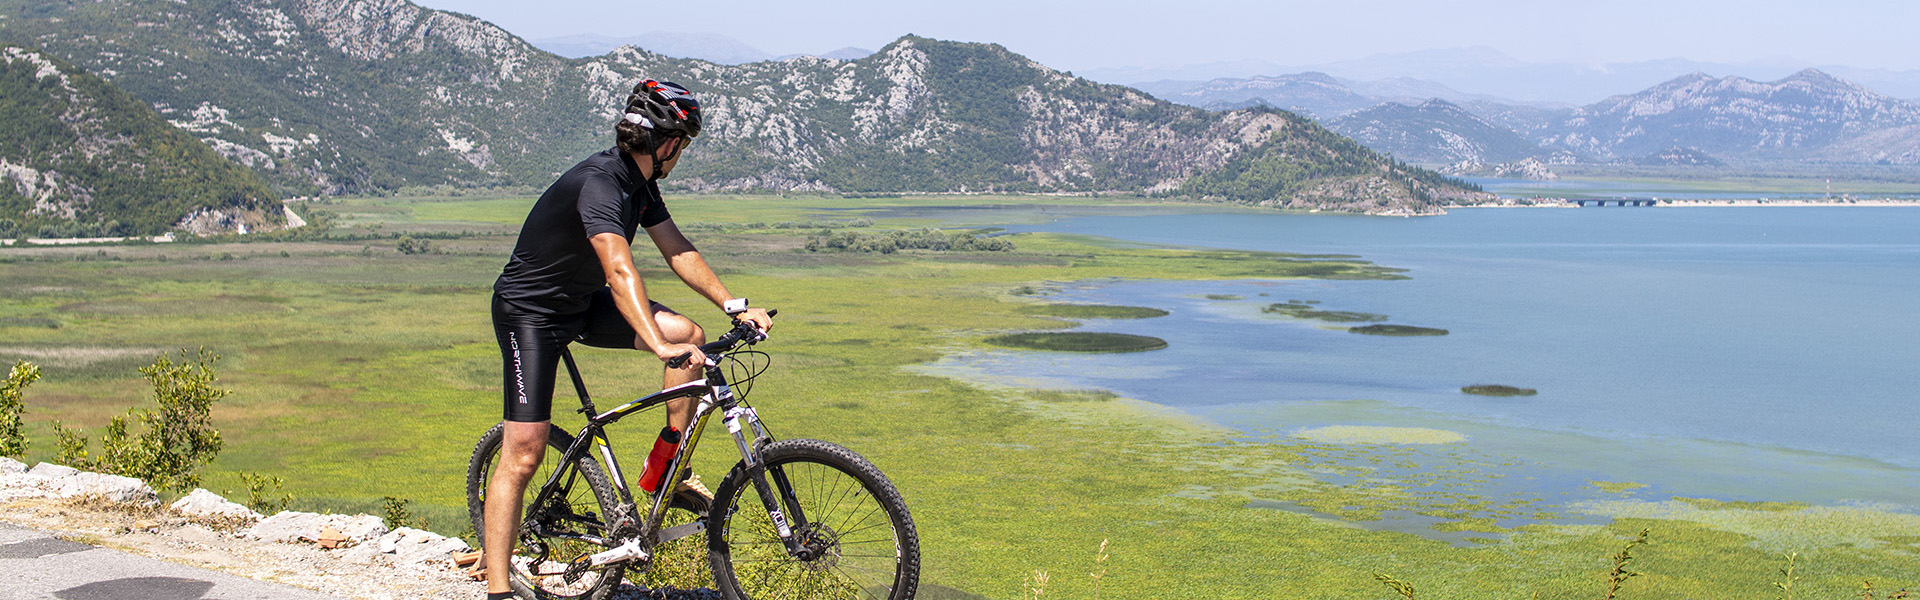 Guided bicycle holiday in Bosnia and Montenegro, from Sarajevo to Skadar Lake national park